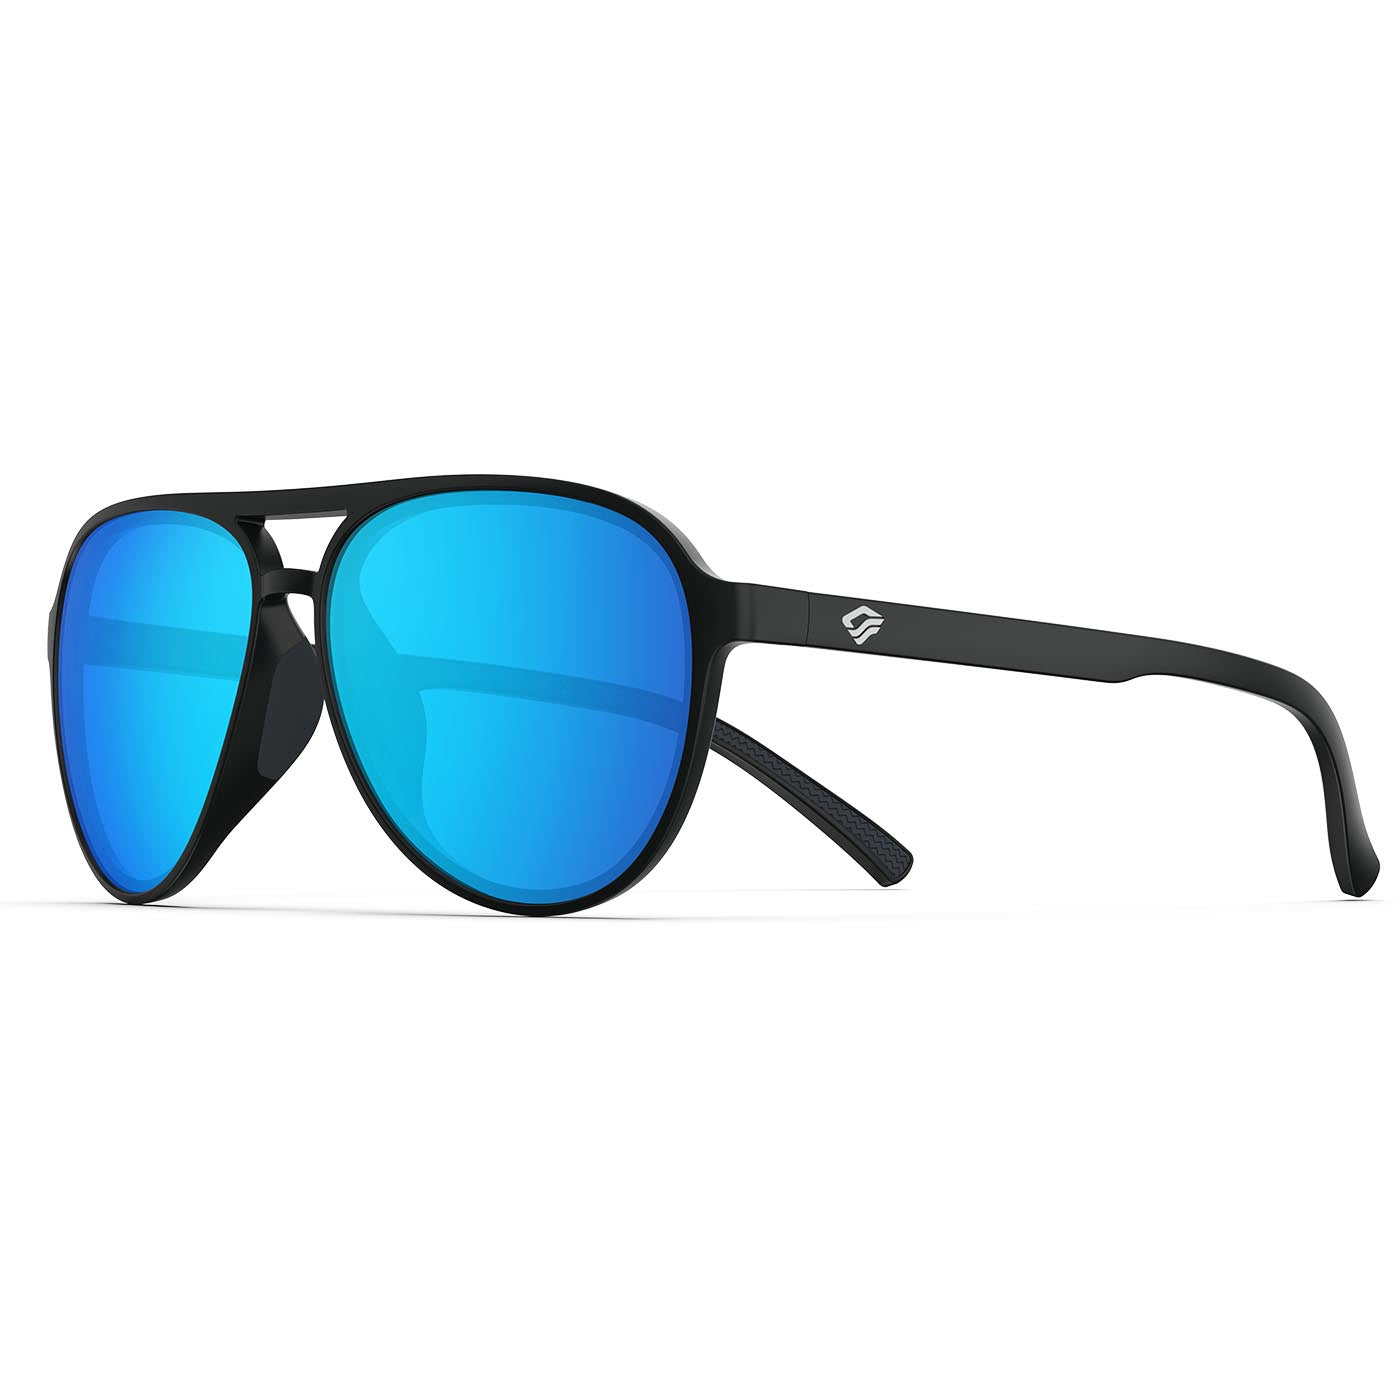 Cabo Men's Classic Black Mirrored Sunglasses (Blue Lens or Yellow